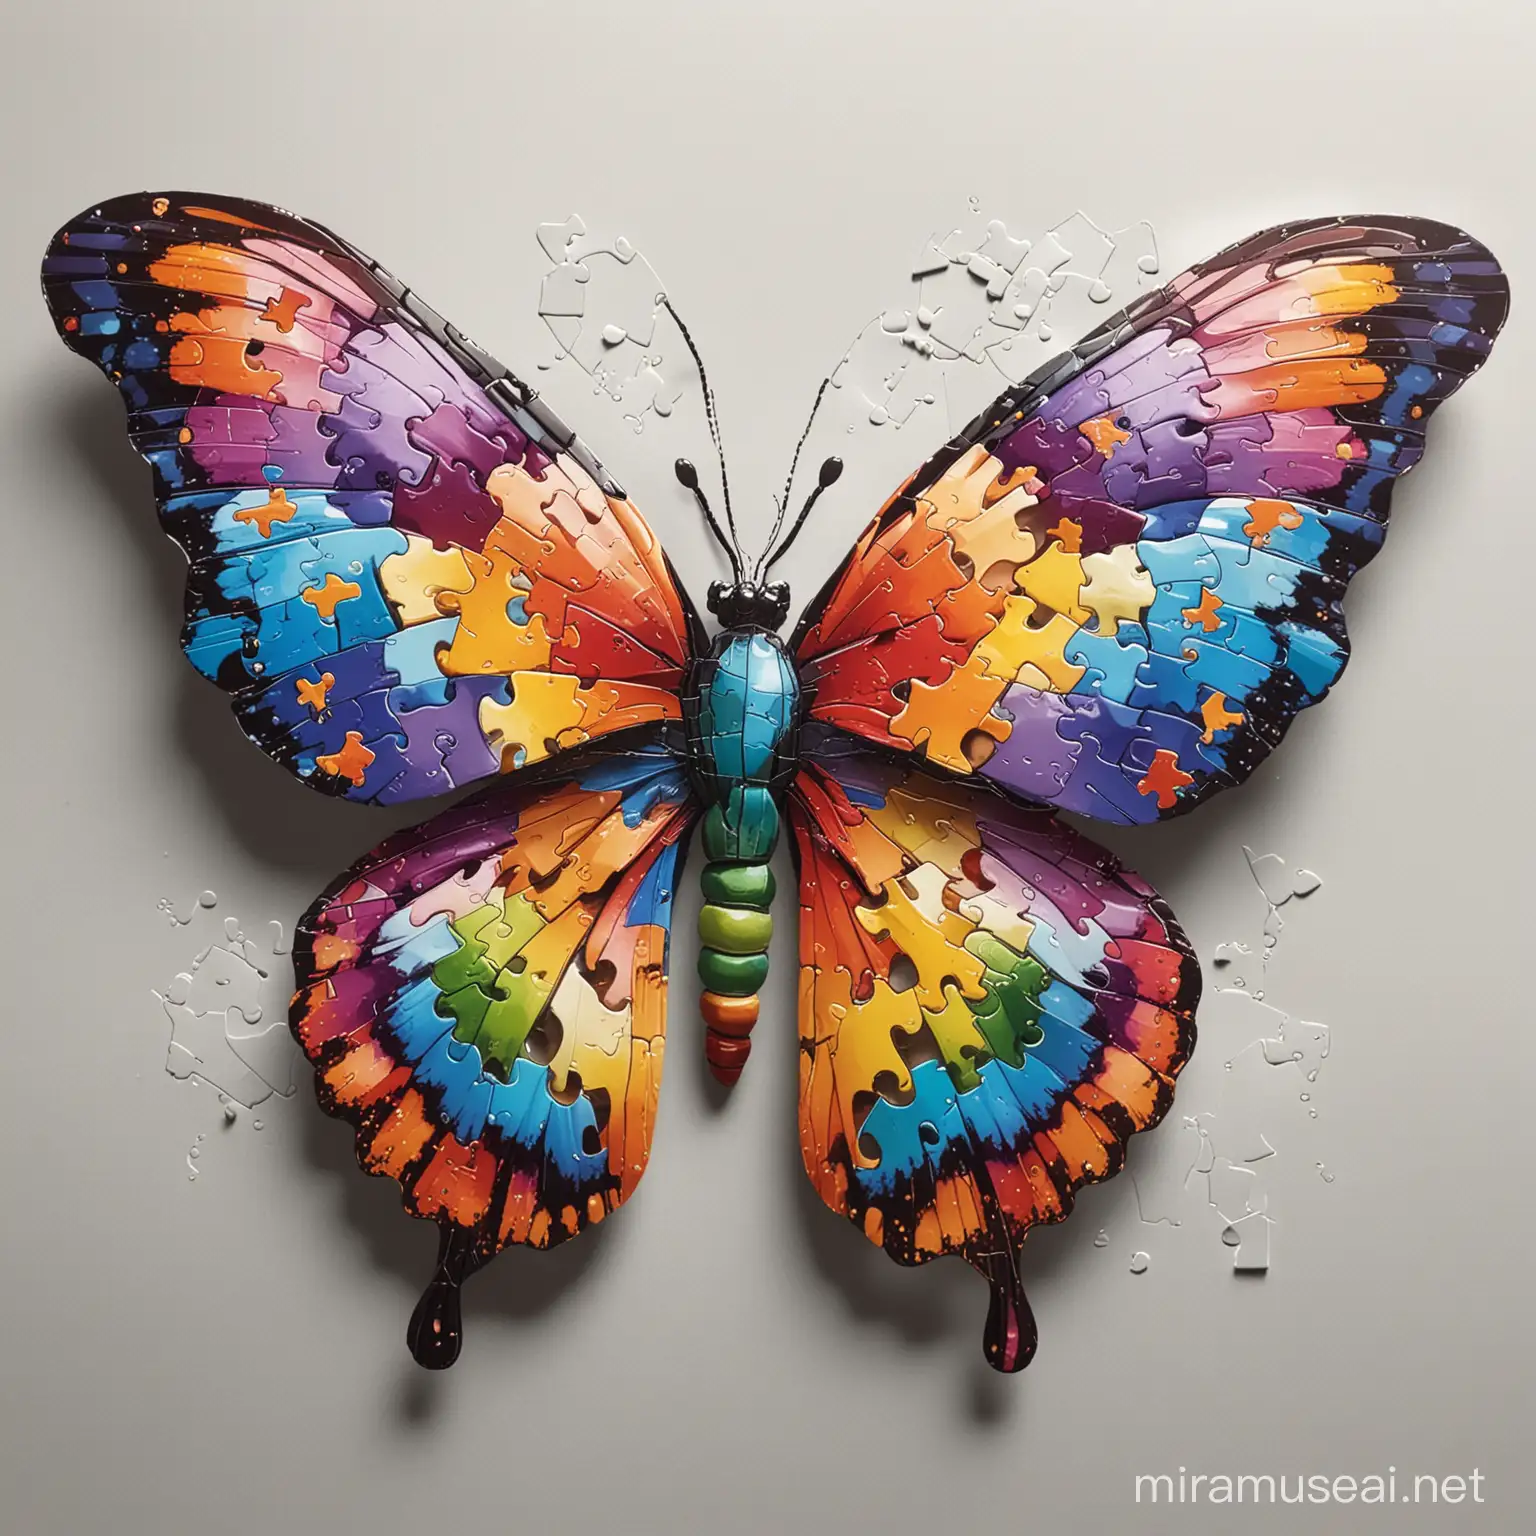 Vibrant Butterfly with Puzzle Pieces A Kaleidoscope of Colors and Intricate Details